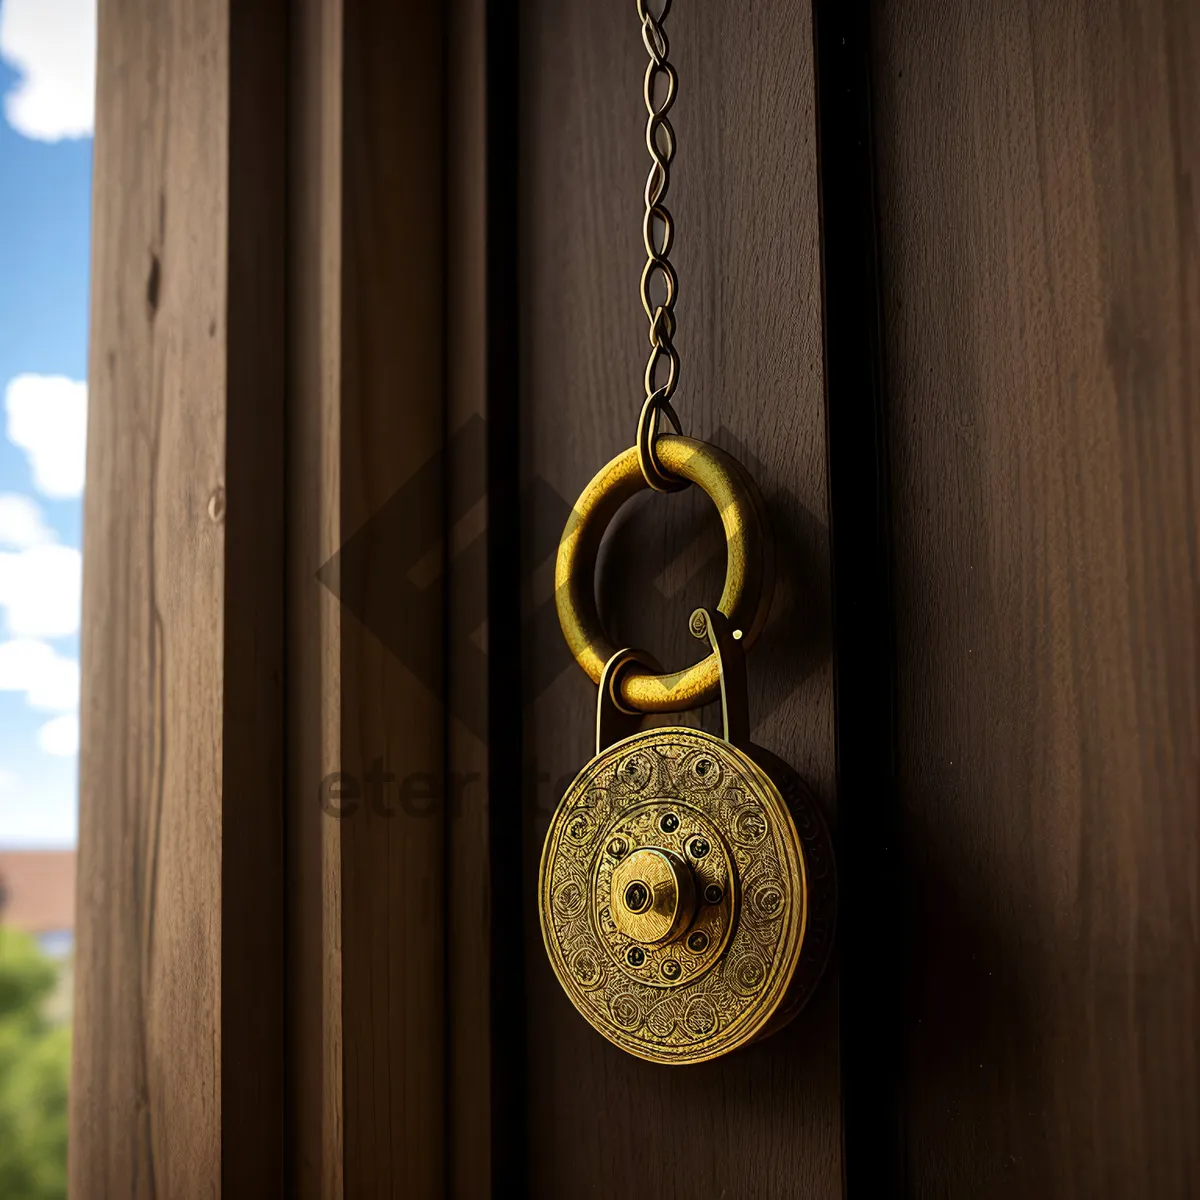 Picture of Antique Gold Padlock with Ornate Metal Chain